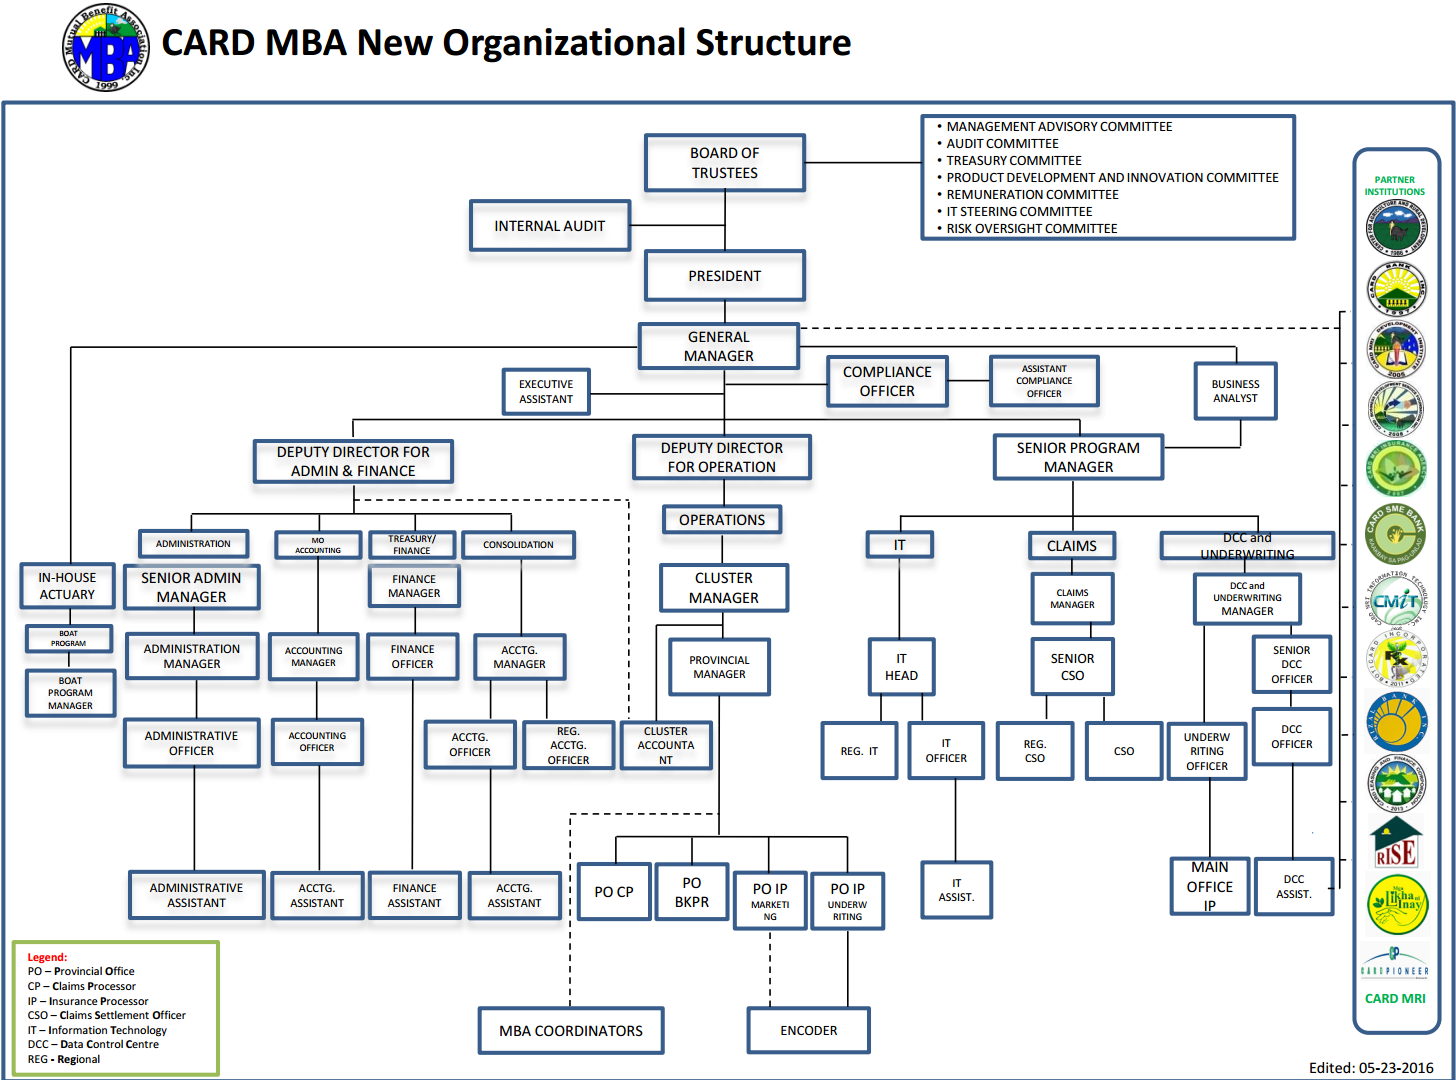 CARD MBA ORGANIZATIONAL STRUCTURE - 5.06.14 (FINAL) Revised V.2